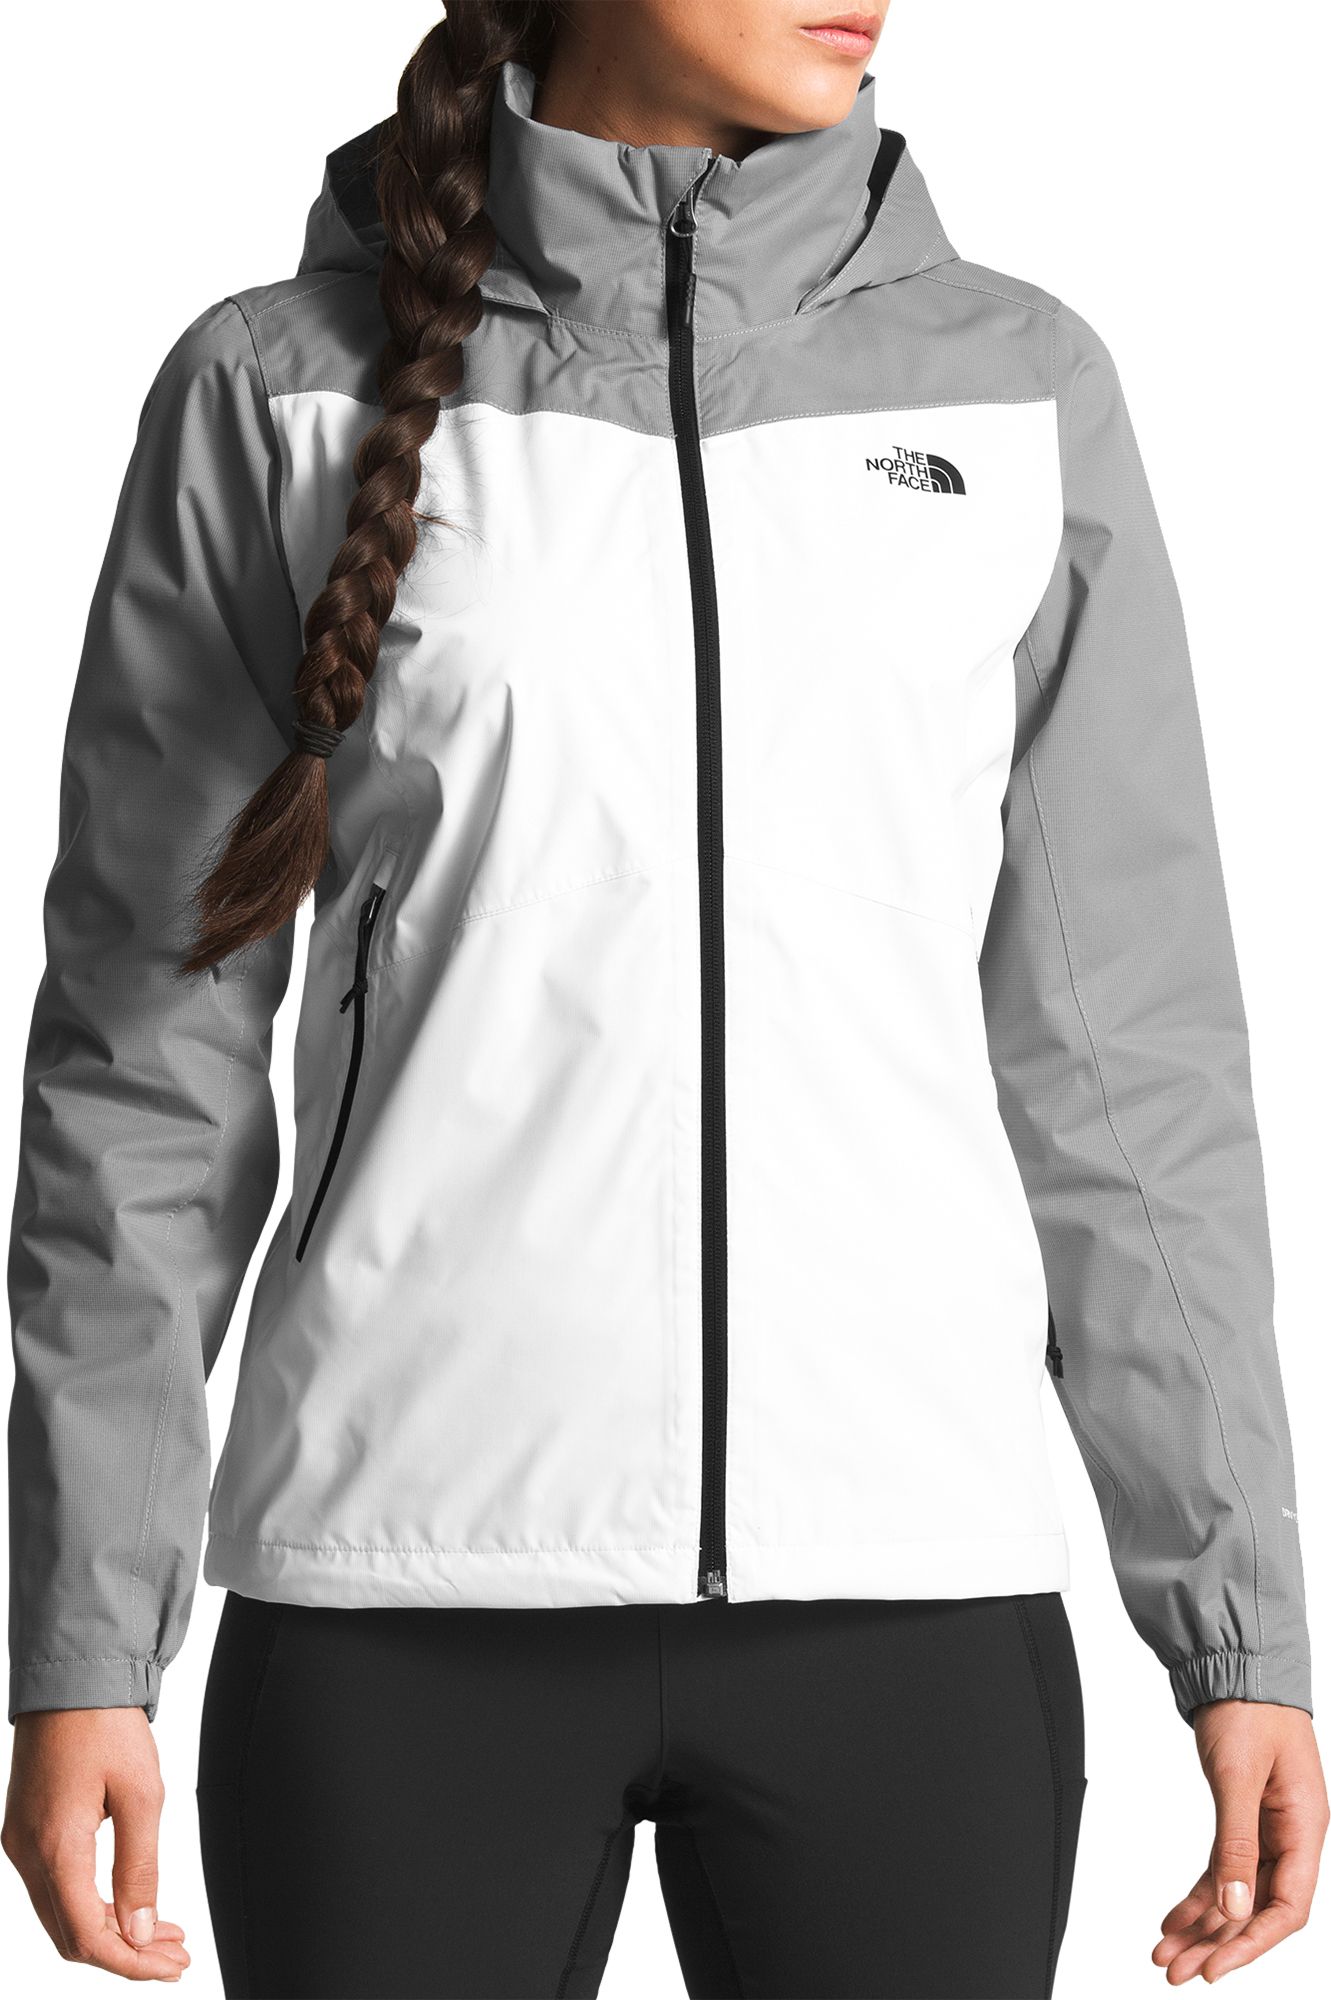 dicks sporting goods north face womens